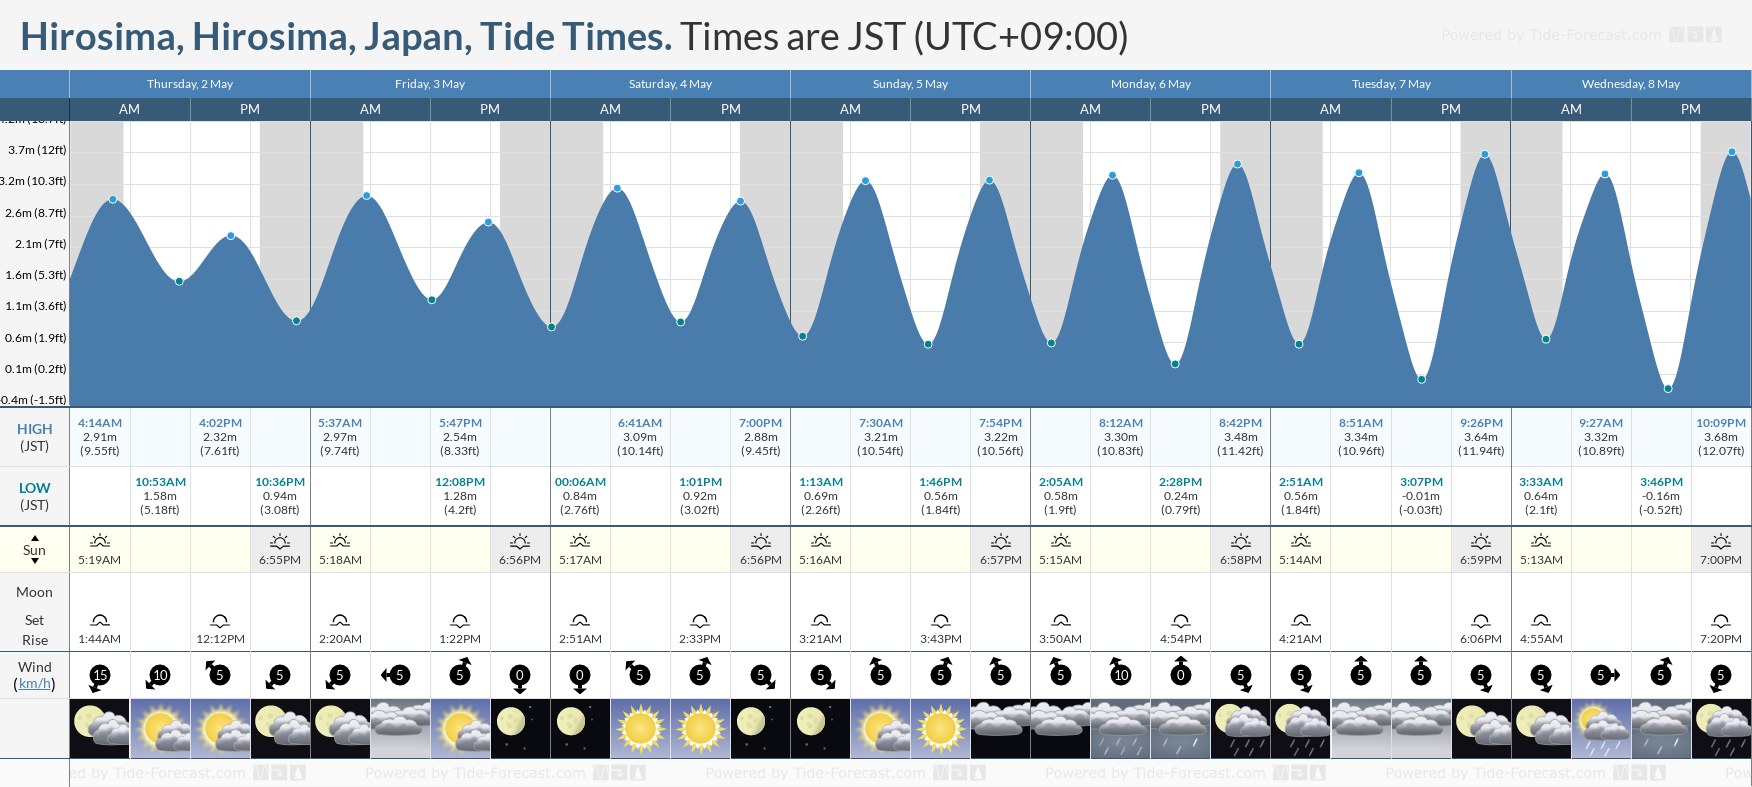 Hirosima, Hirosima, Japan Tide Chart including high and low tide tide times for the next 7 days